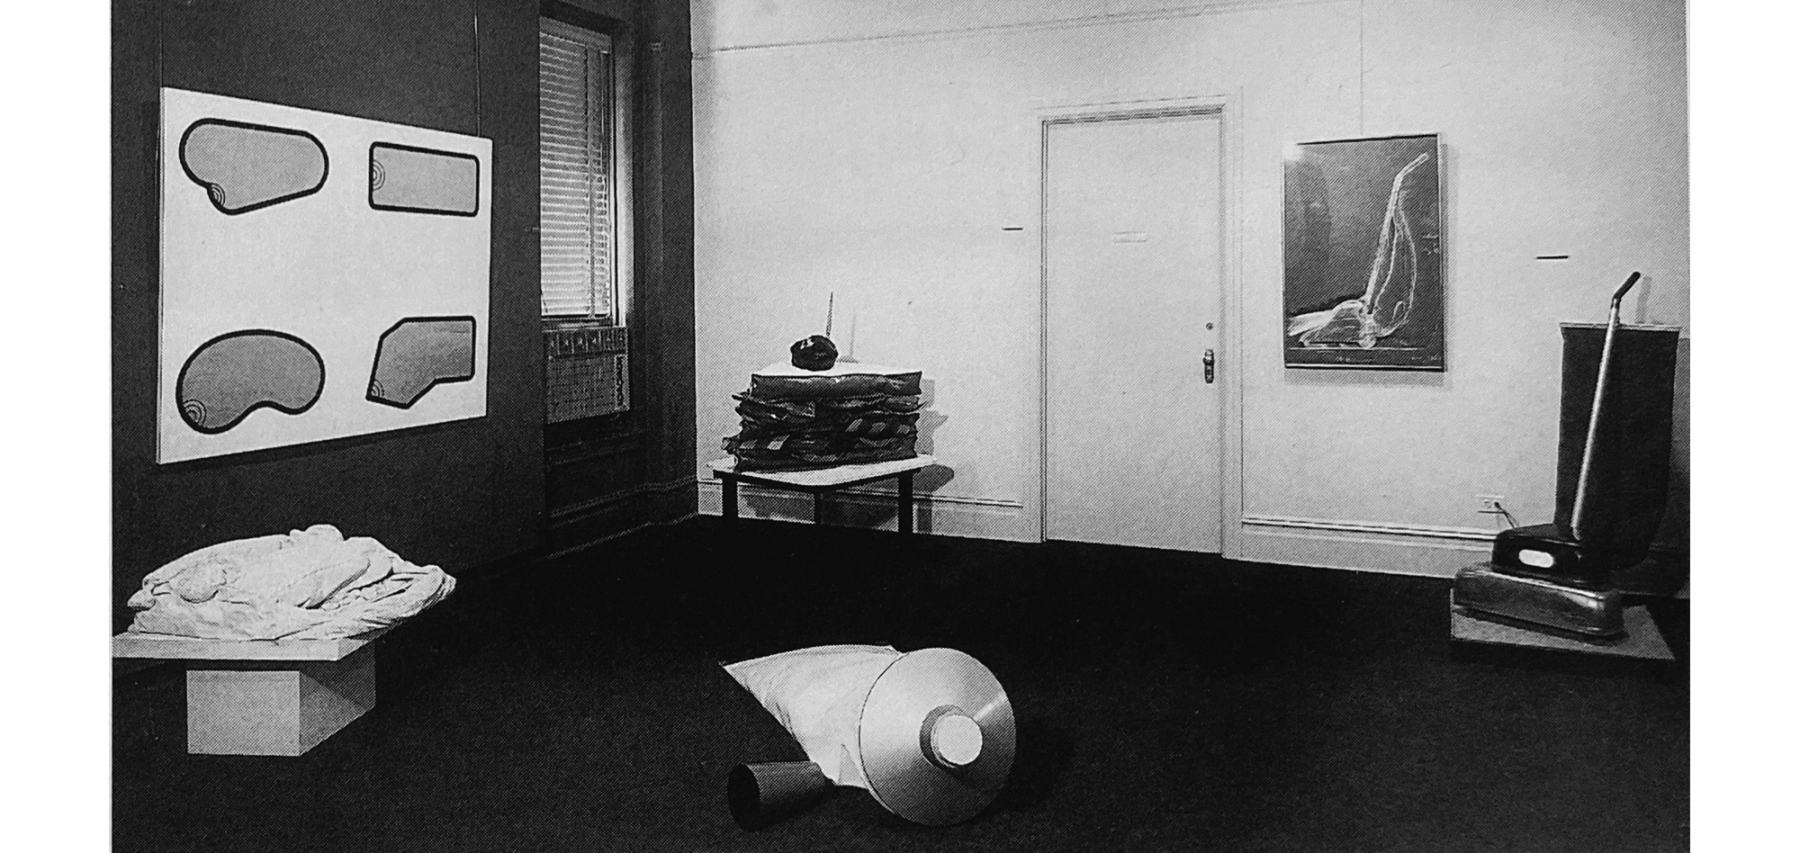 &nbsp; &nbsp; &nbsp; &nbsp; &nbsp; &nbsp; &nbsp; &nbsp; &nbsp; &nbsp; &nbsp; &nbsp; &nbsp; &nbsp; &nbsp; &nbsp; &nbsp; &nbsp; &nbsp; &nbsp; &nbsp; Installation view, Exhibition of Recent Work by Claes Oldenburg (alternatively titled The Home), Sidney Janis Gallery, New York, April 7 - May 2, 1964.